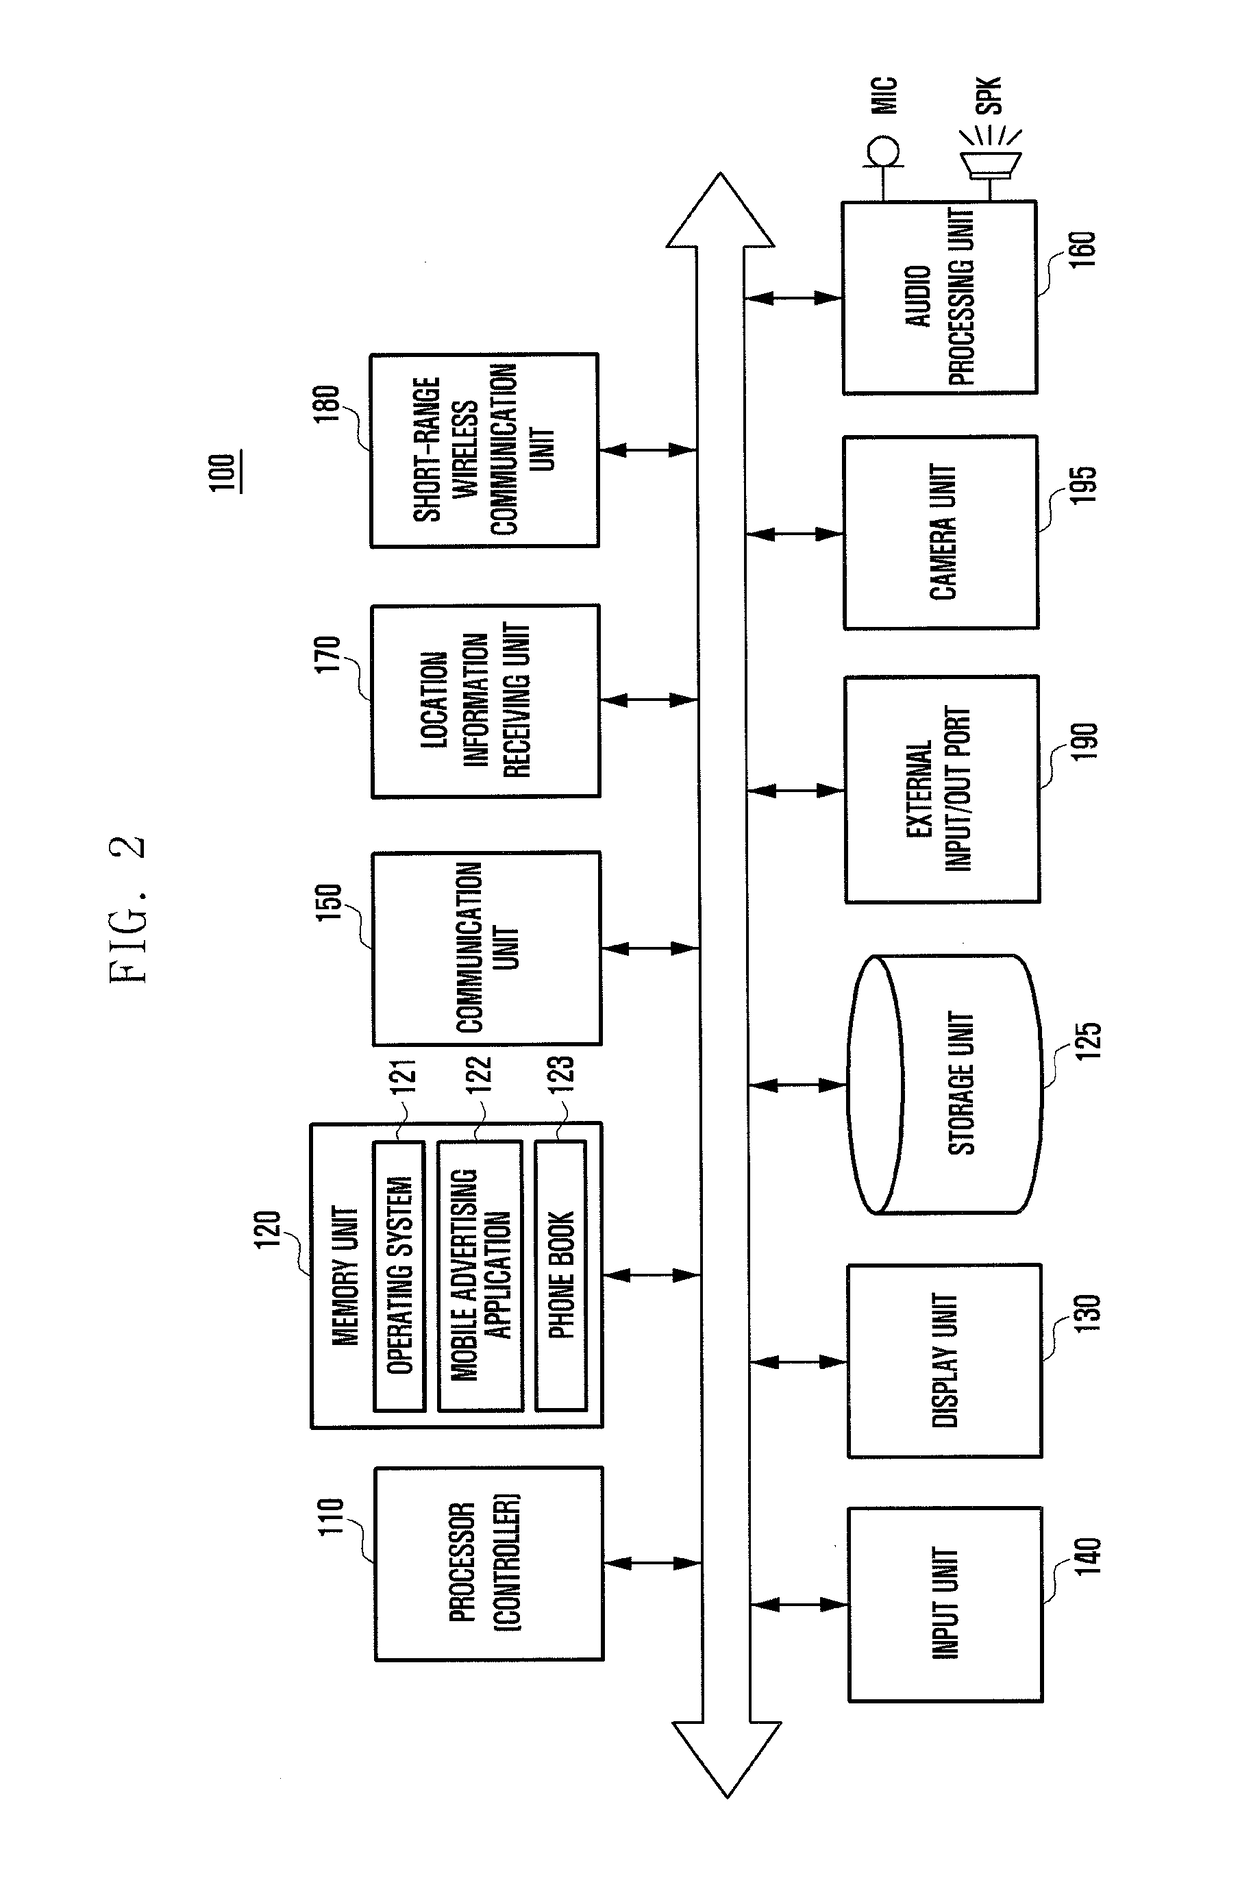 System and method for providing mobile advertising services